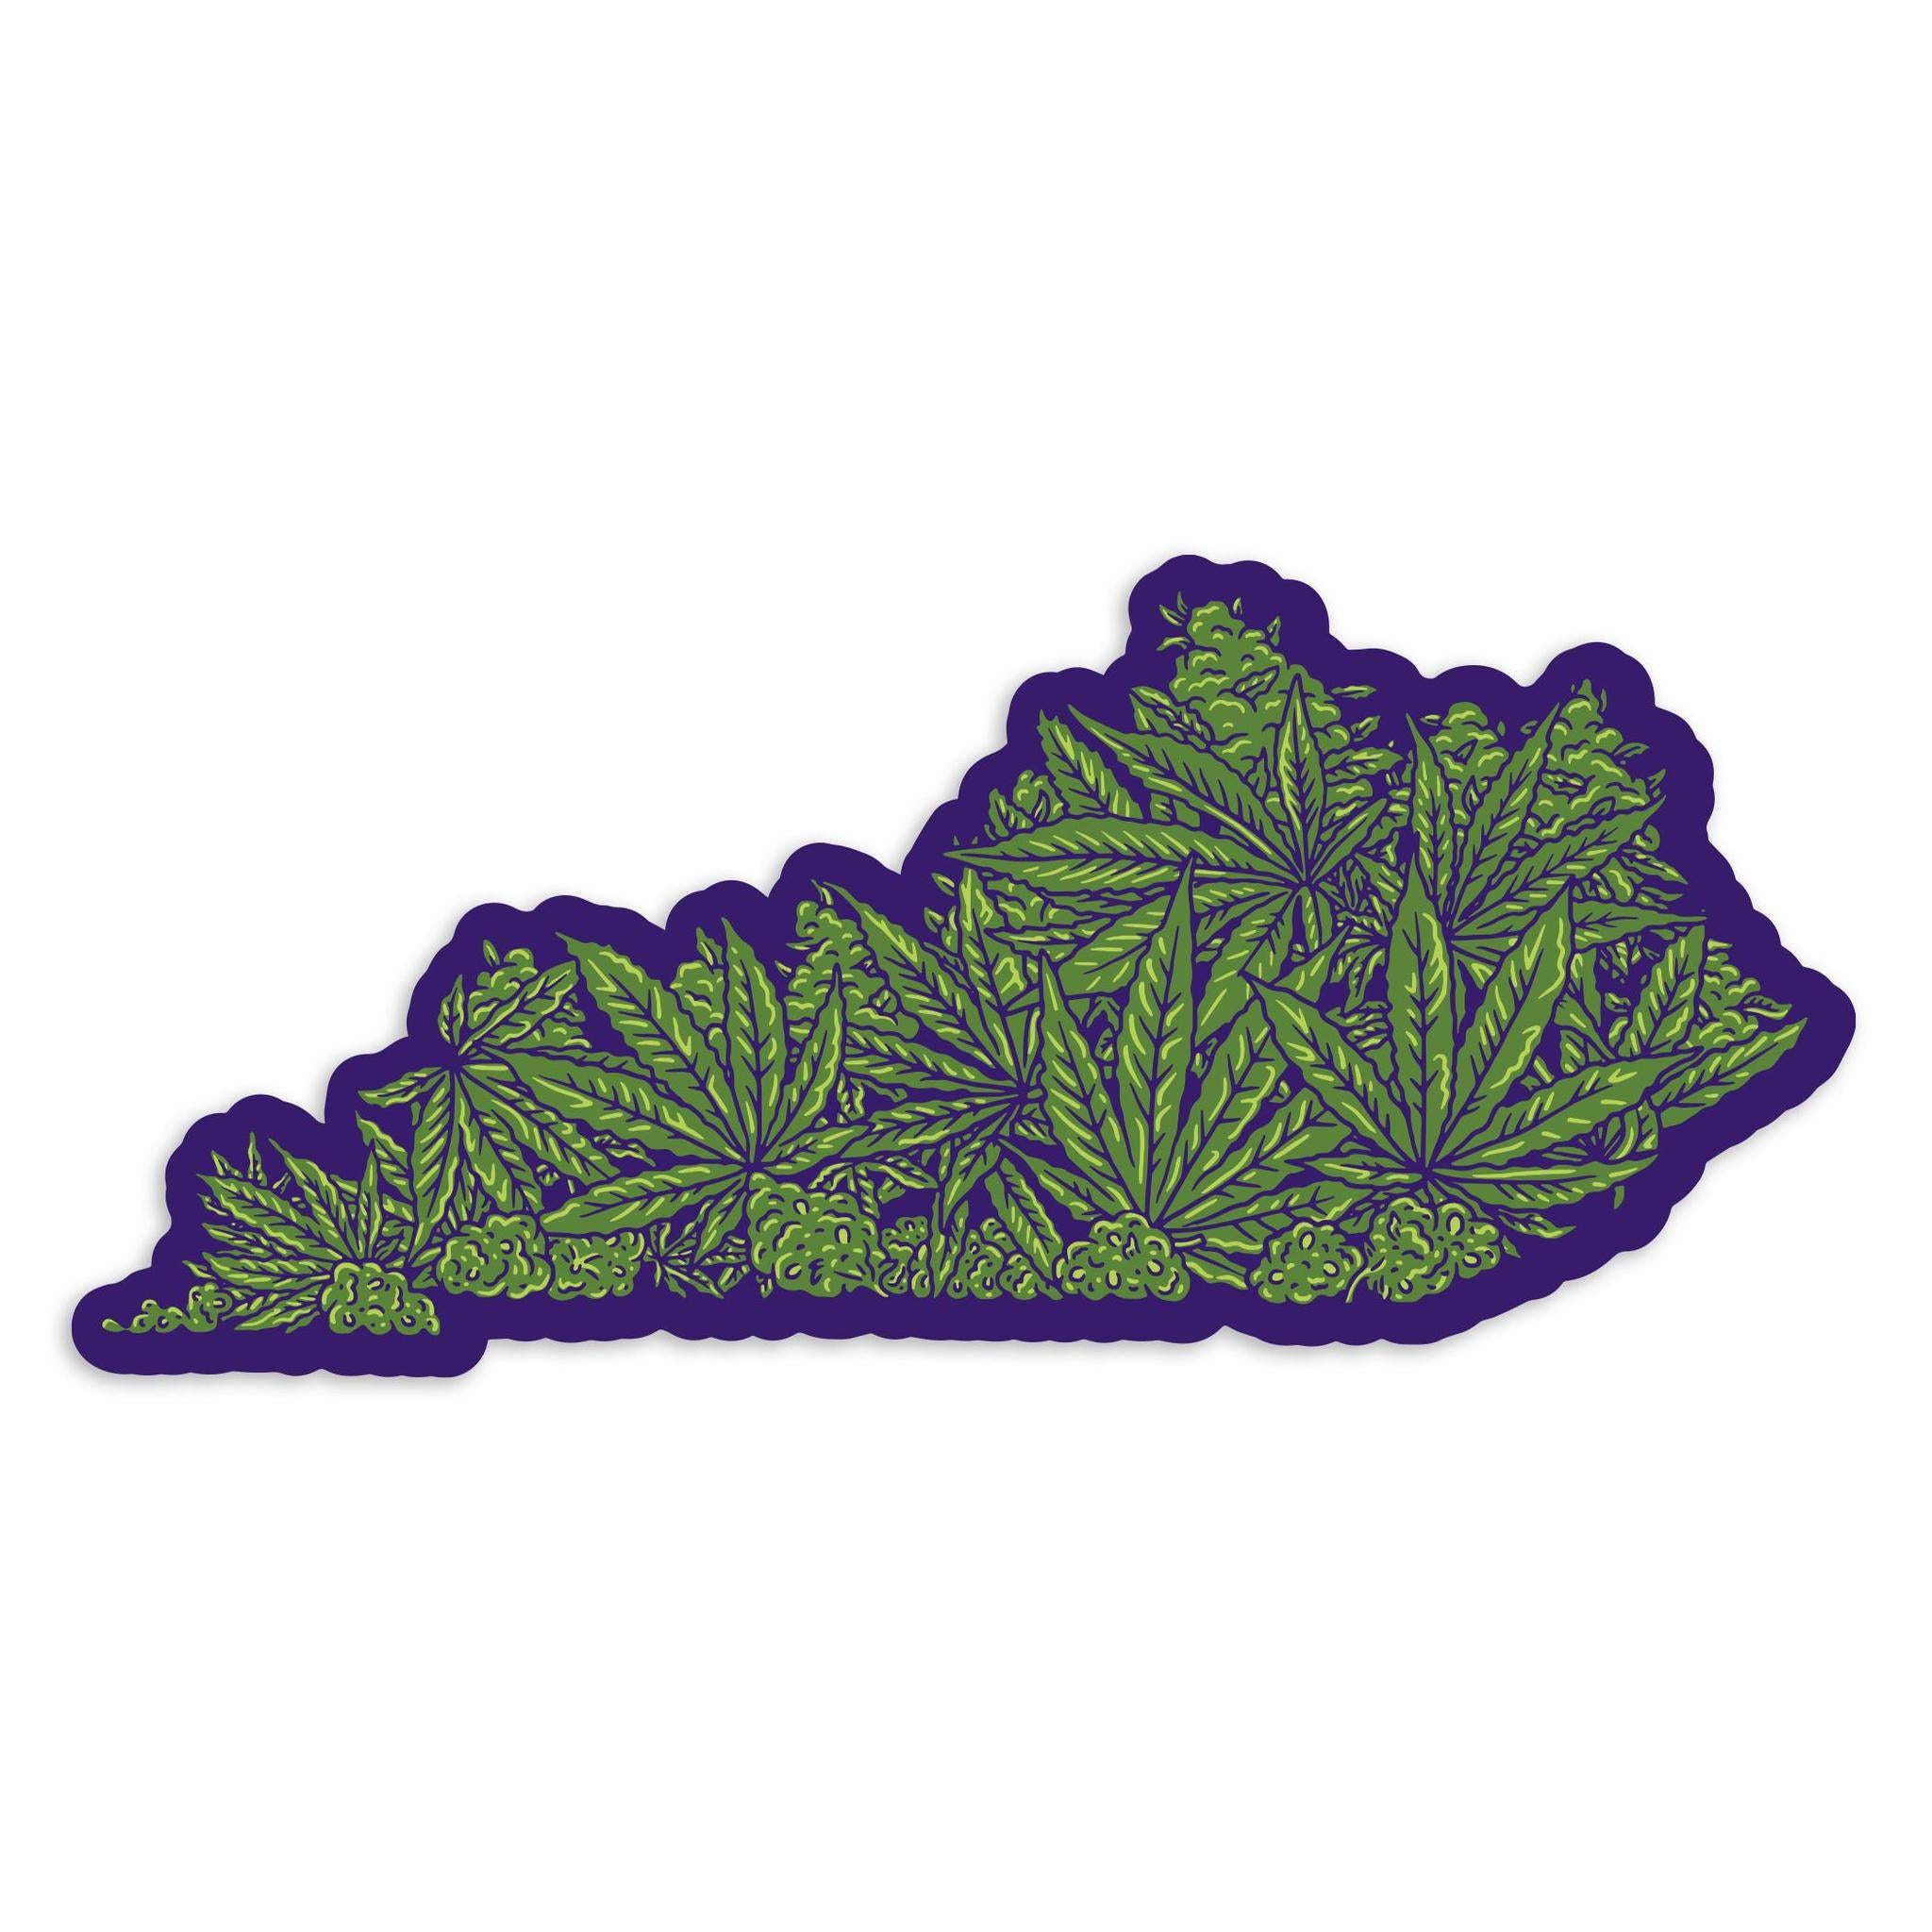 KY Buds Sticker-Stickers-KY for KY Store